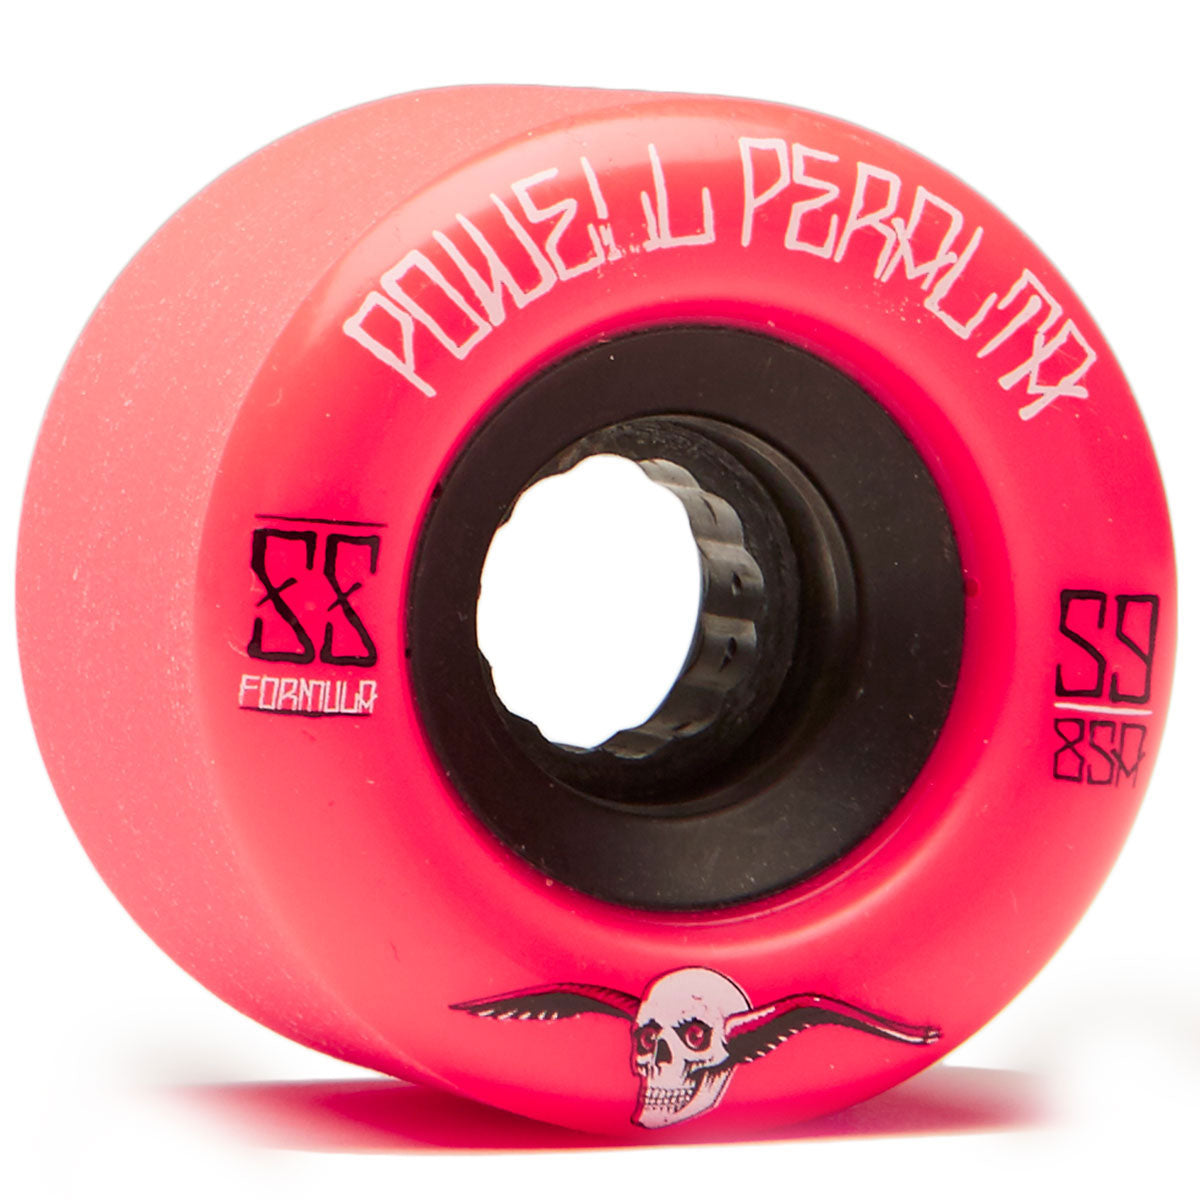 Powell-Peralta G-Slides 85A Longboard Wheels - Red - 59mm image 1